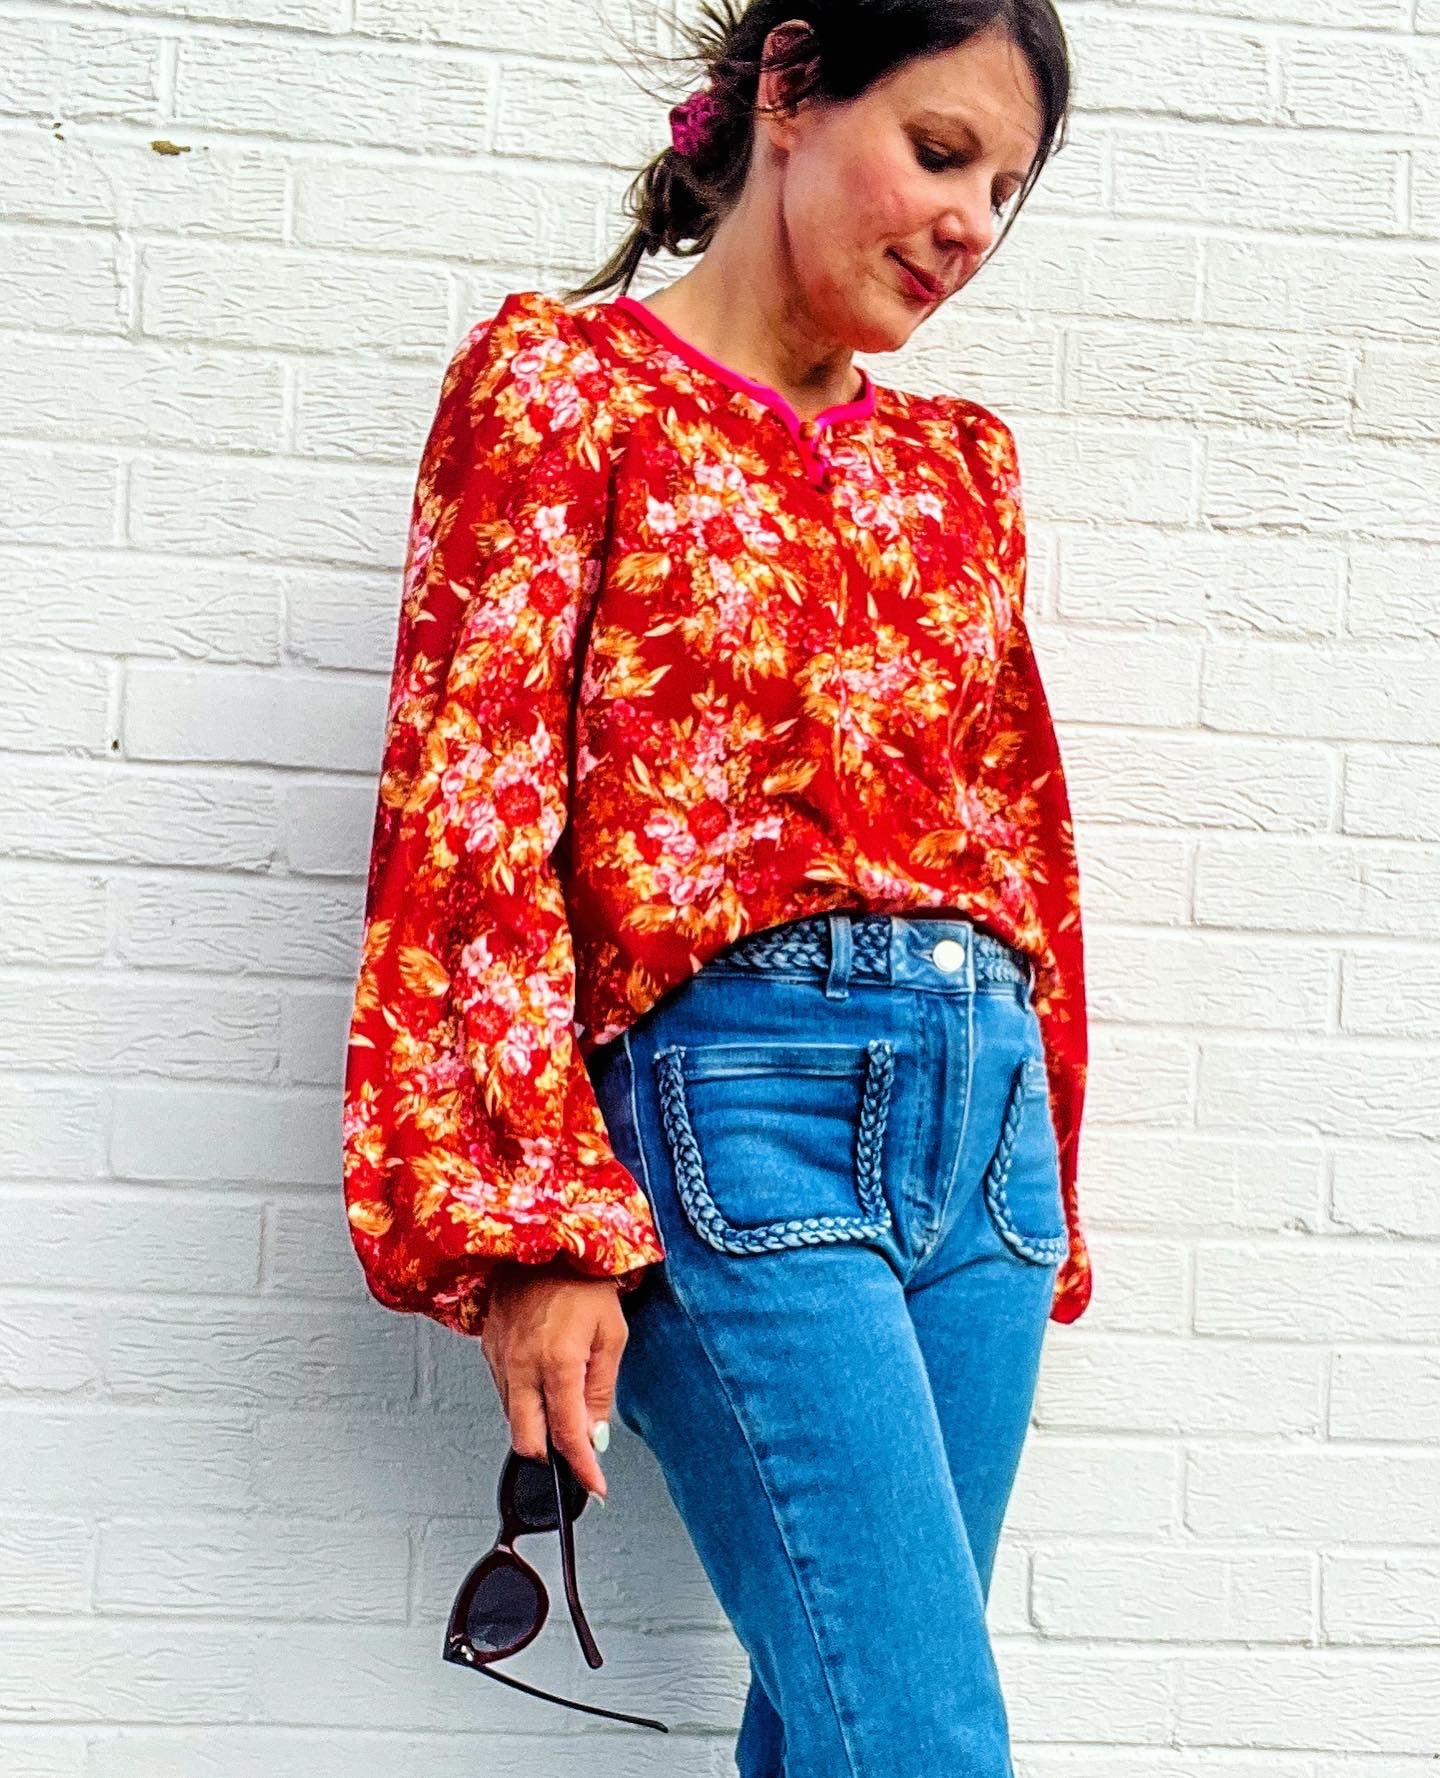 The ‘Red Fleur’ Blouse